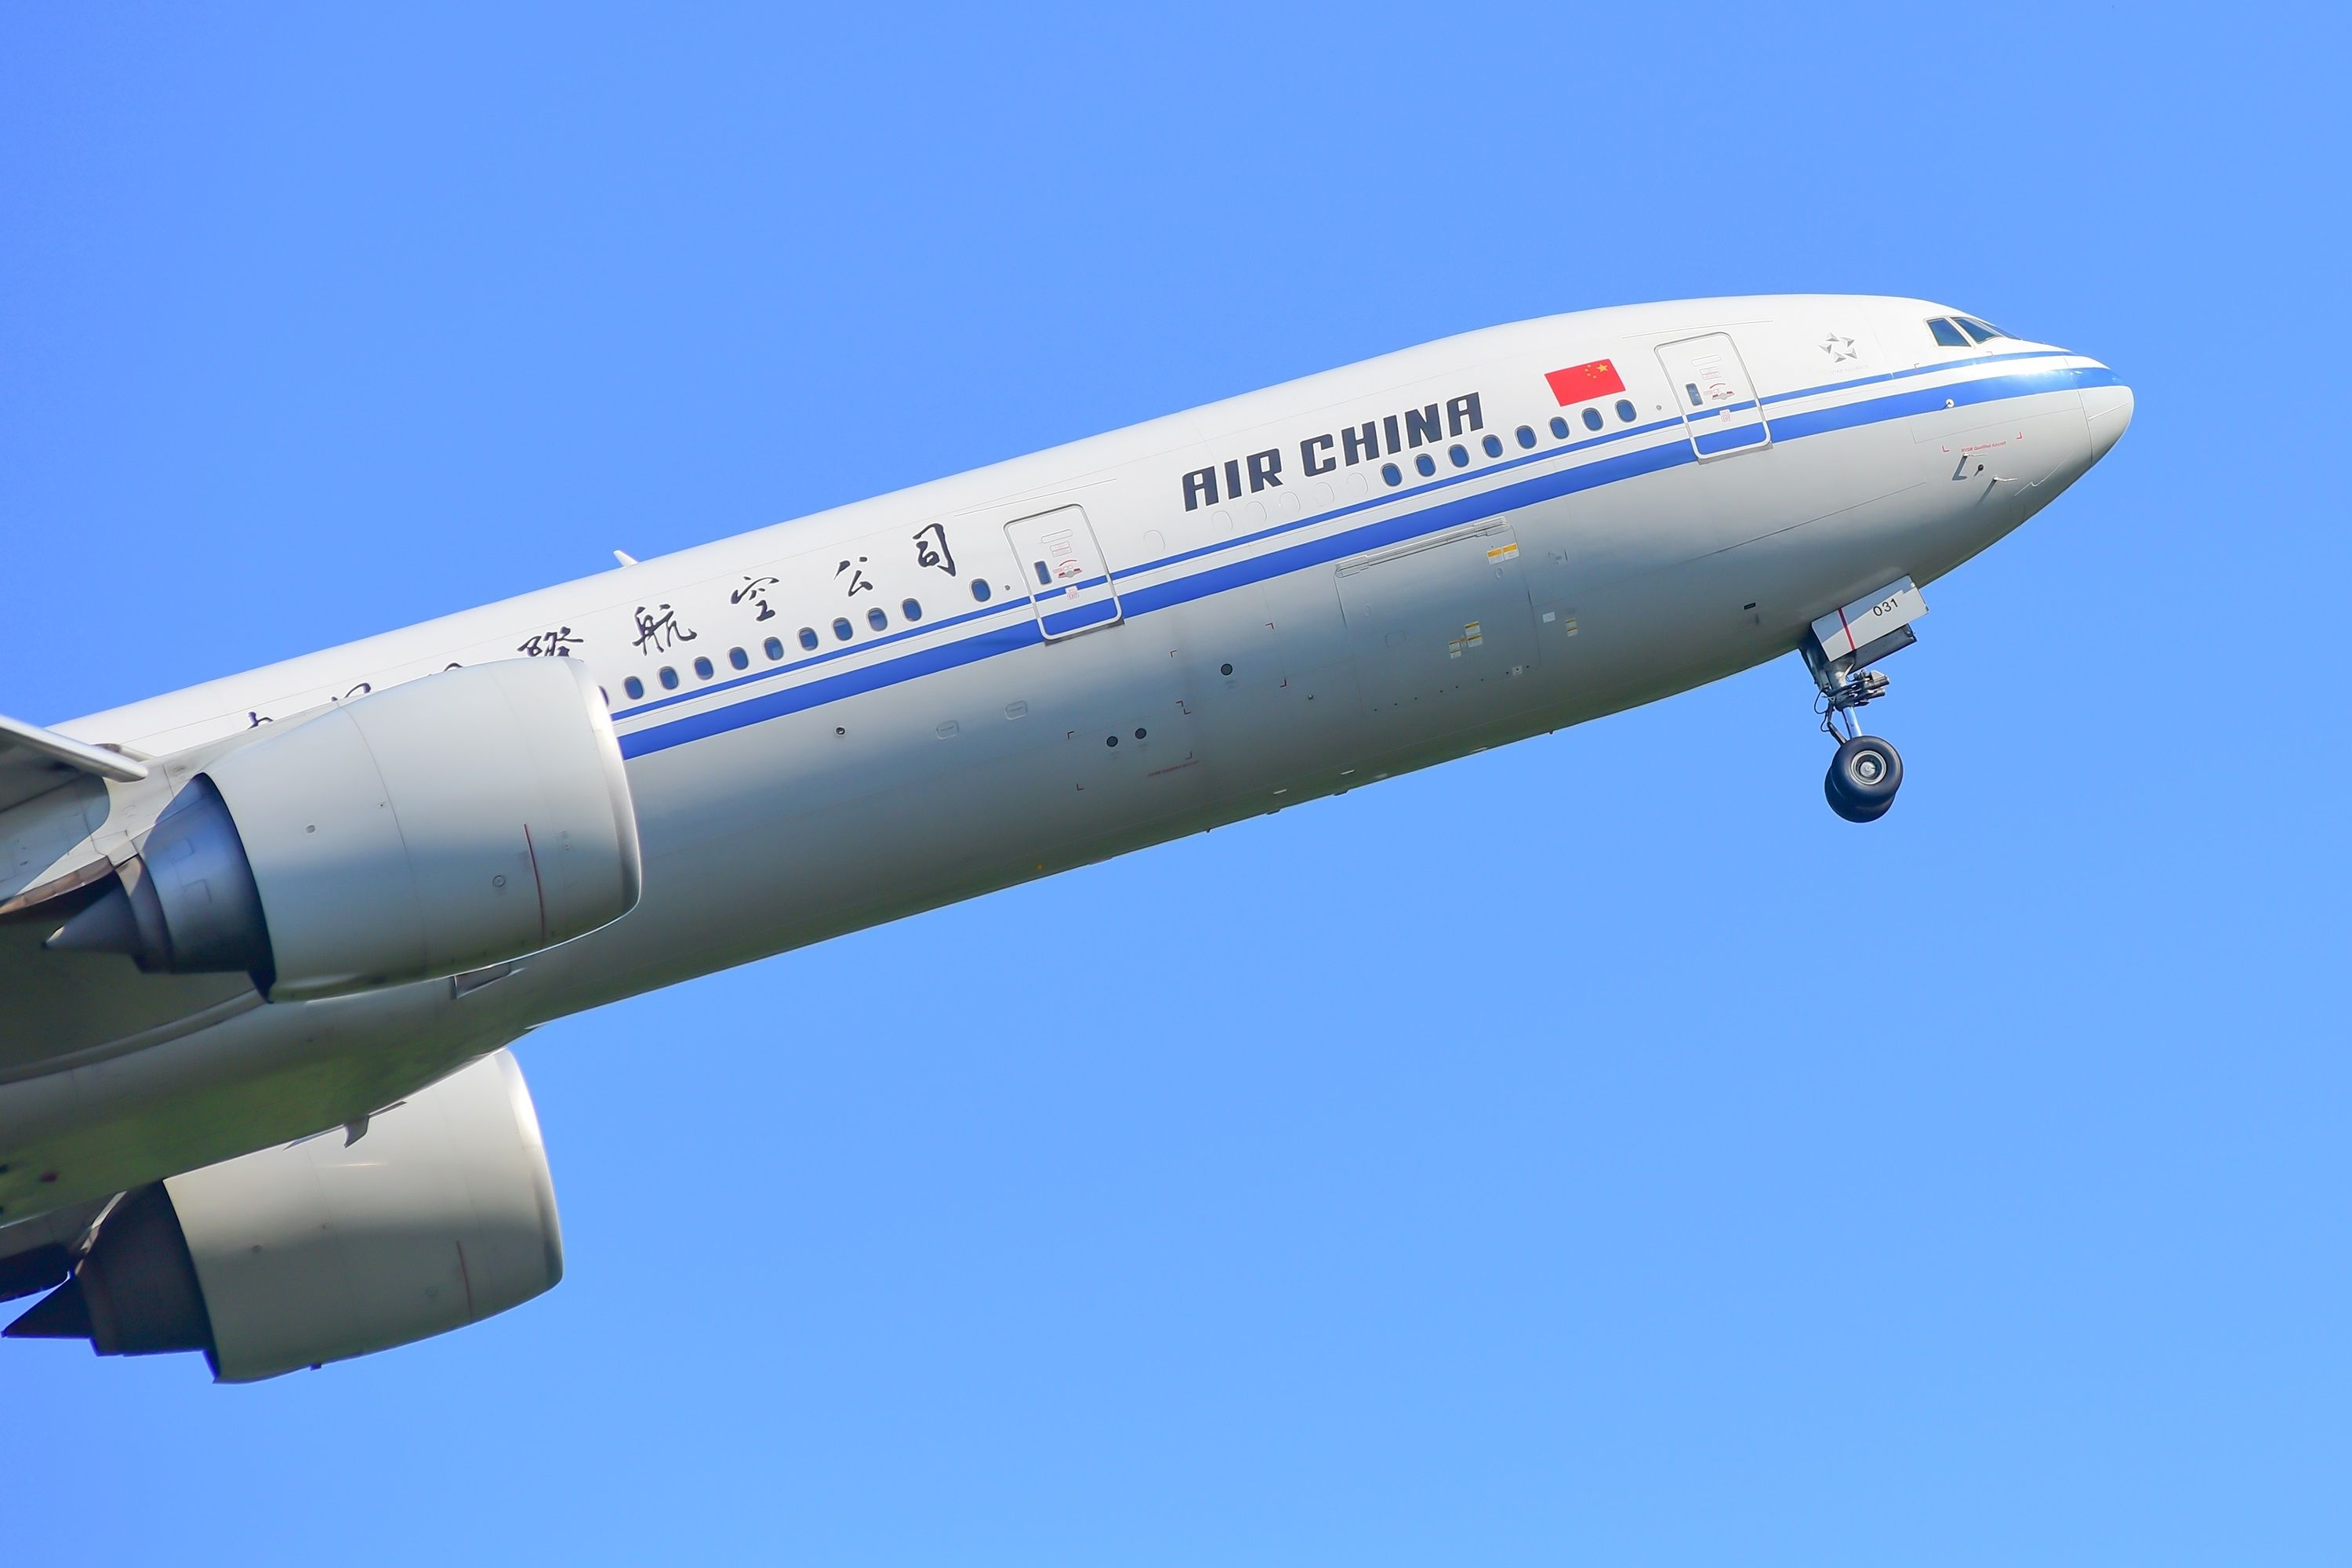 An Air China Boeing 777-300ER flying in the sky.